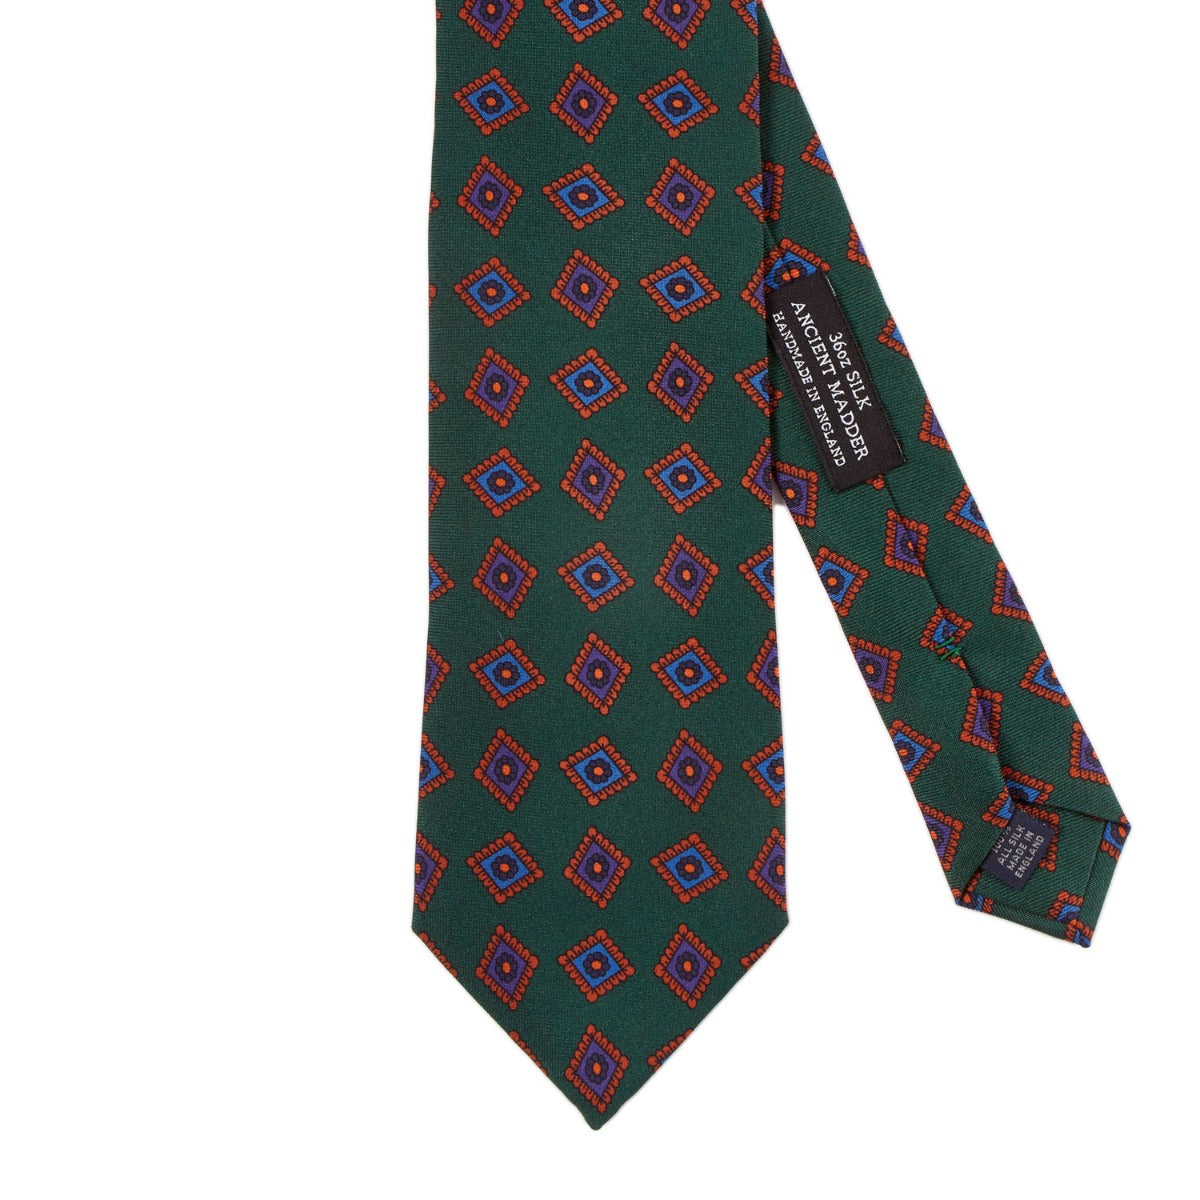 A Sovereign Grade Forrest Green Art Deco Ancient Madder Silk Tie by KirbyAllison.com with a green, red, and blue pattern of the highest quality.